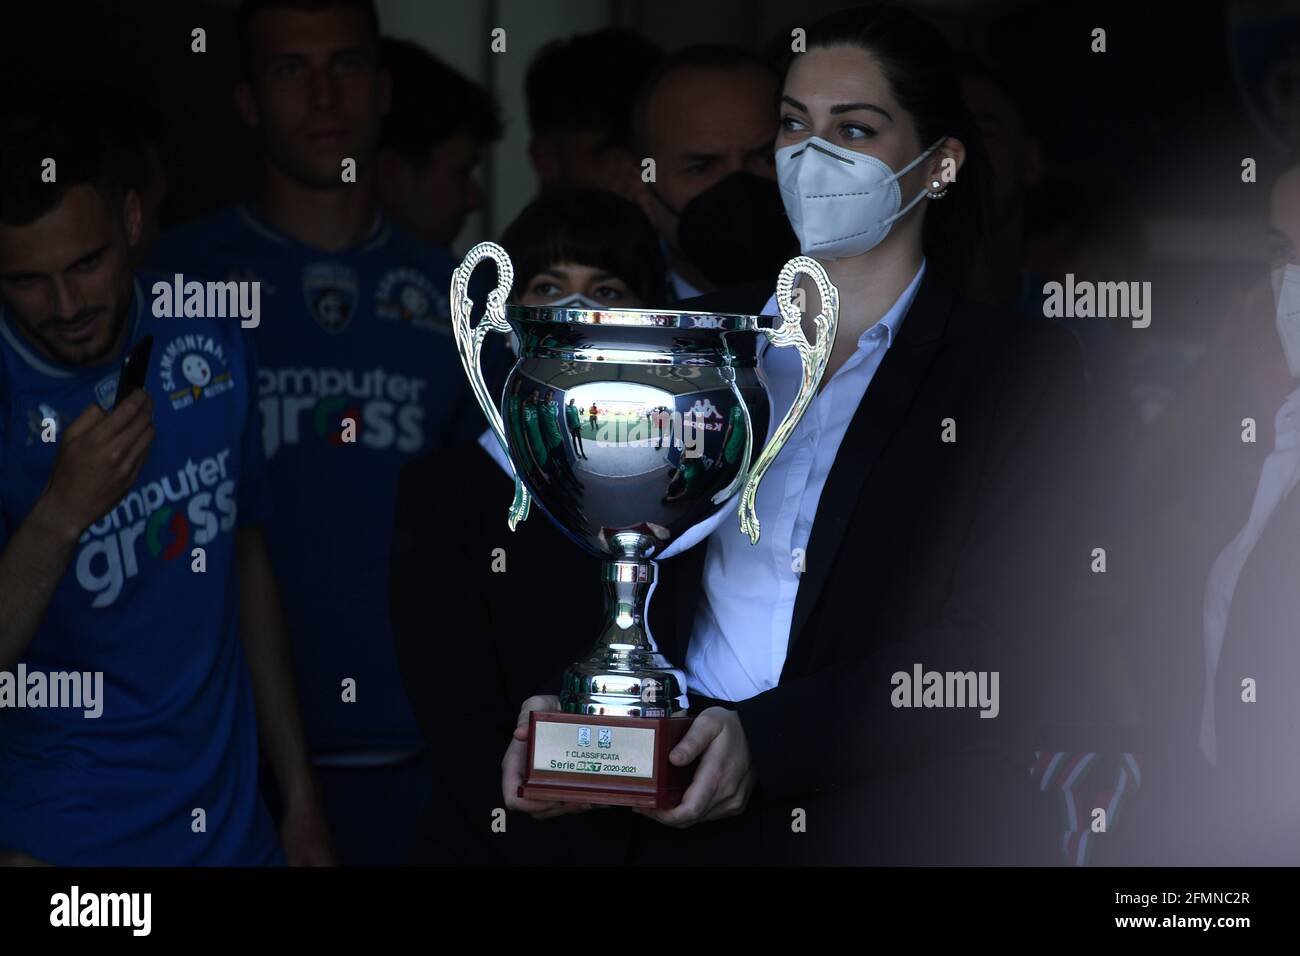 Serie b italy trophy hi-res stock photography and images - Alamy